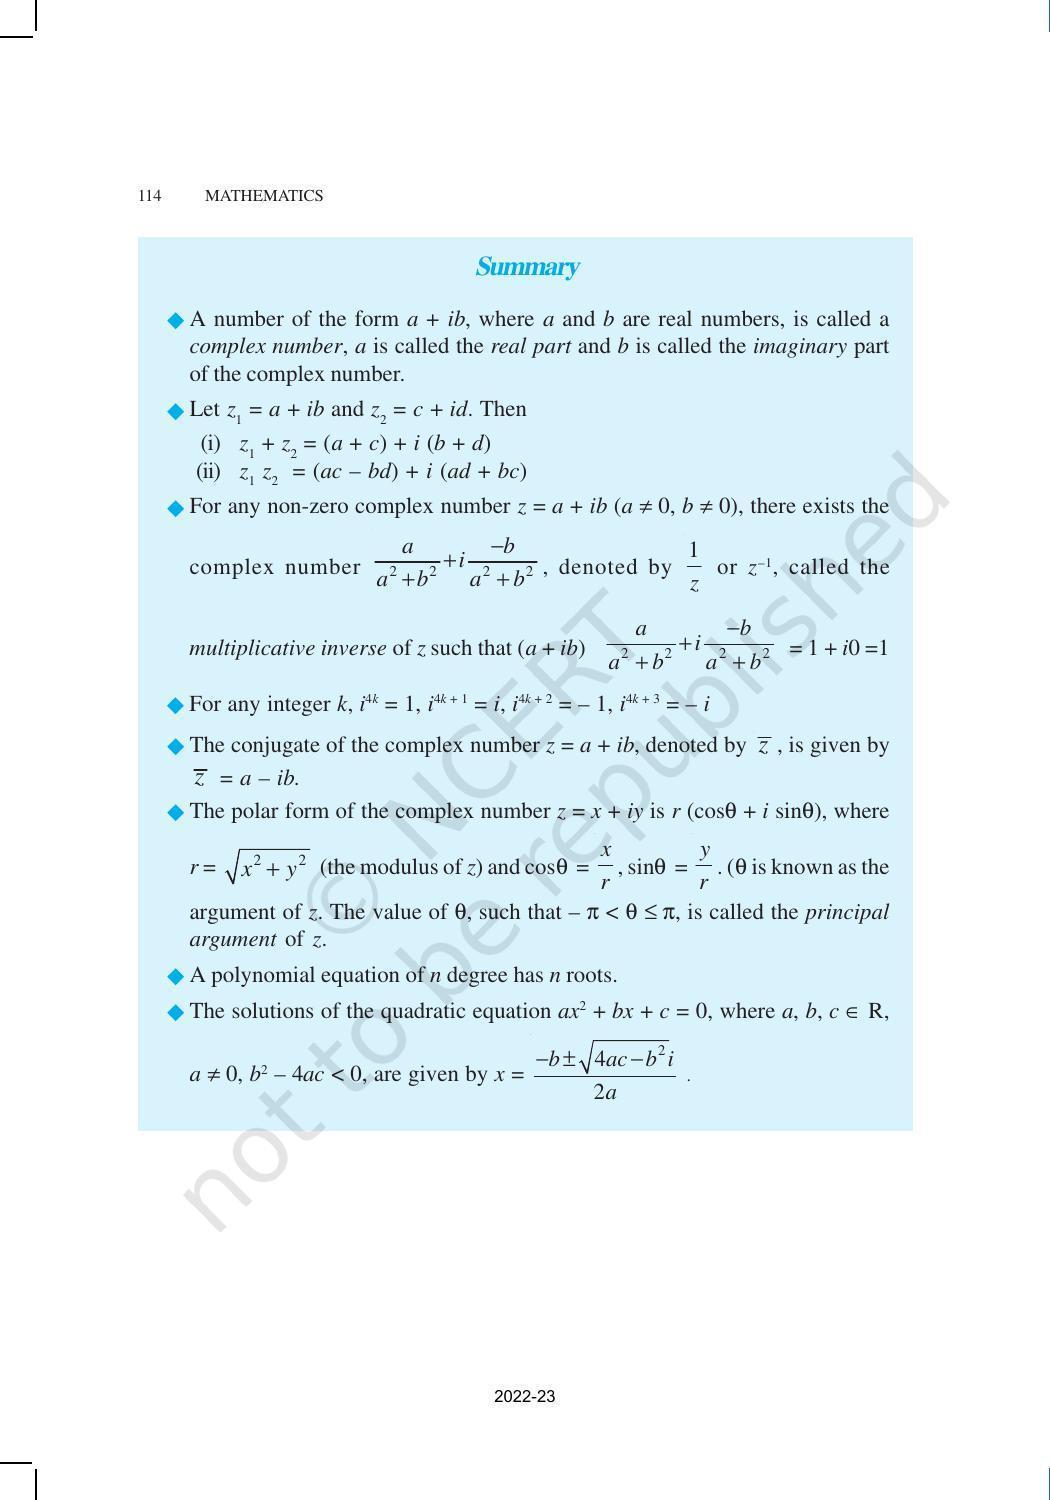 NCERT Book for Class 11 Maths Chapter 5 Complex Numbers and Quadratic Equations - Page 18